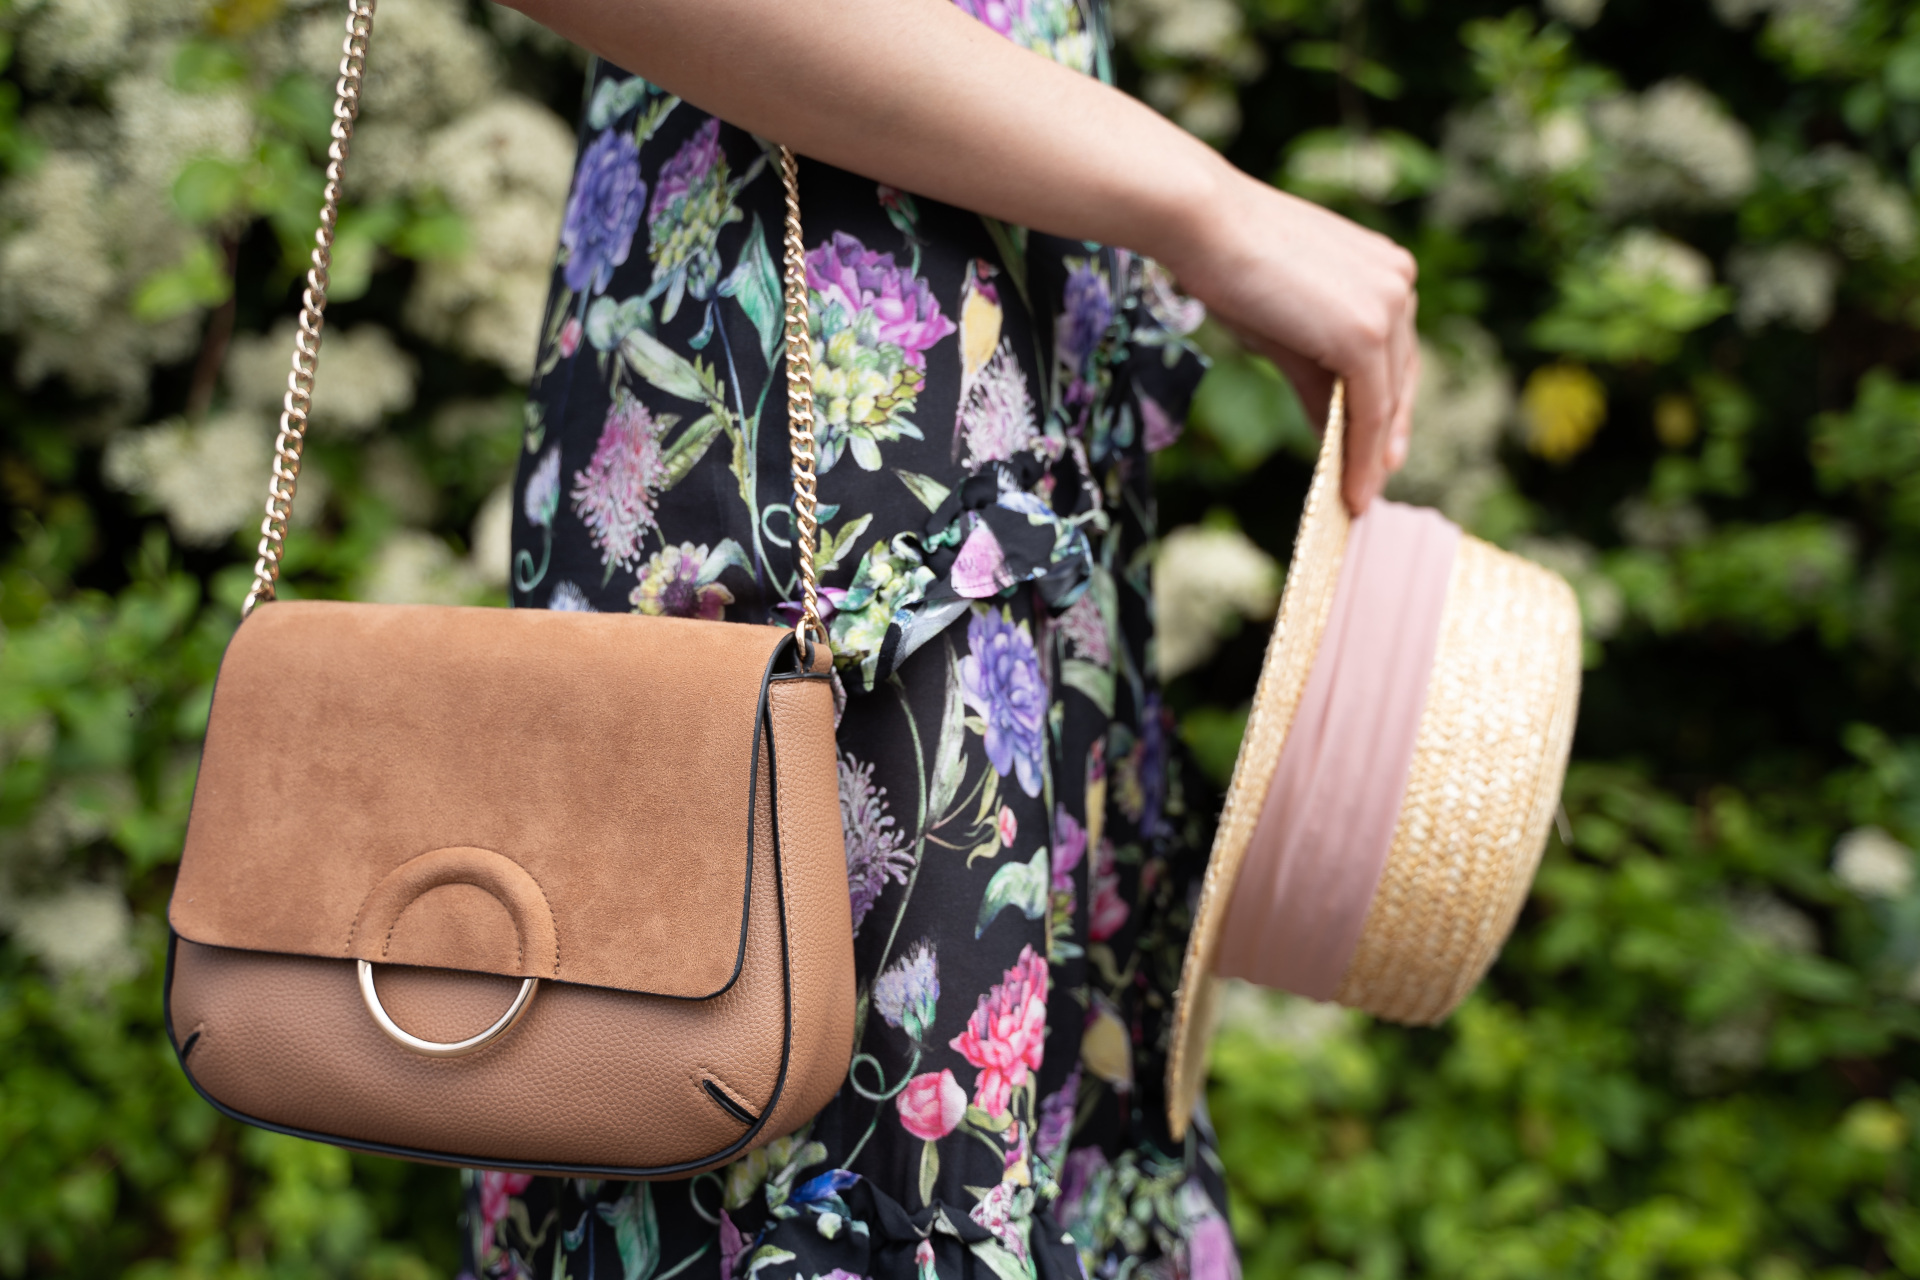 Fashion fans abandon their bucket bags in favour of miniature